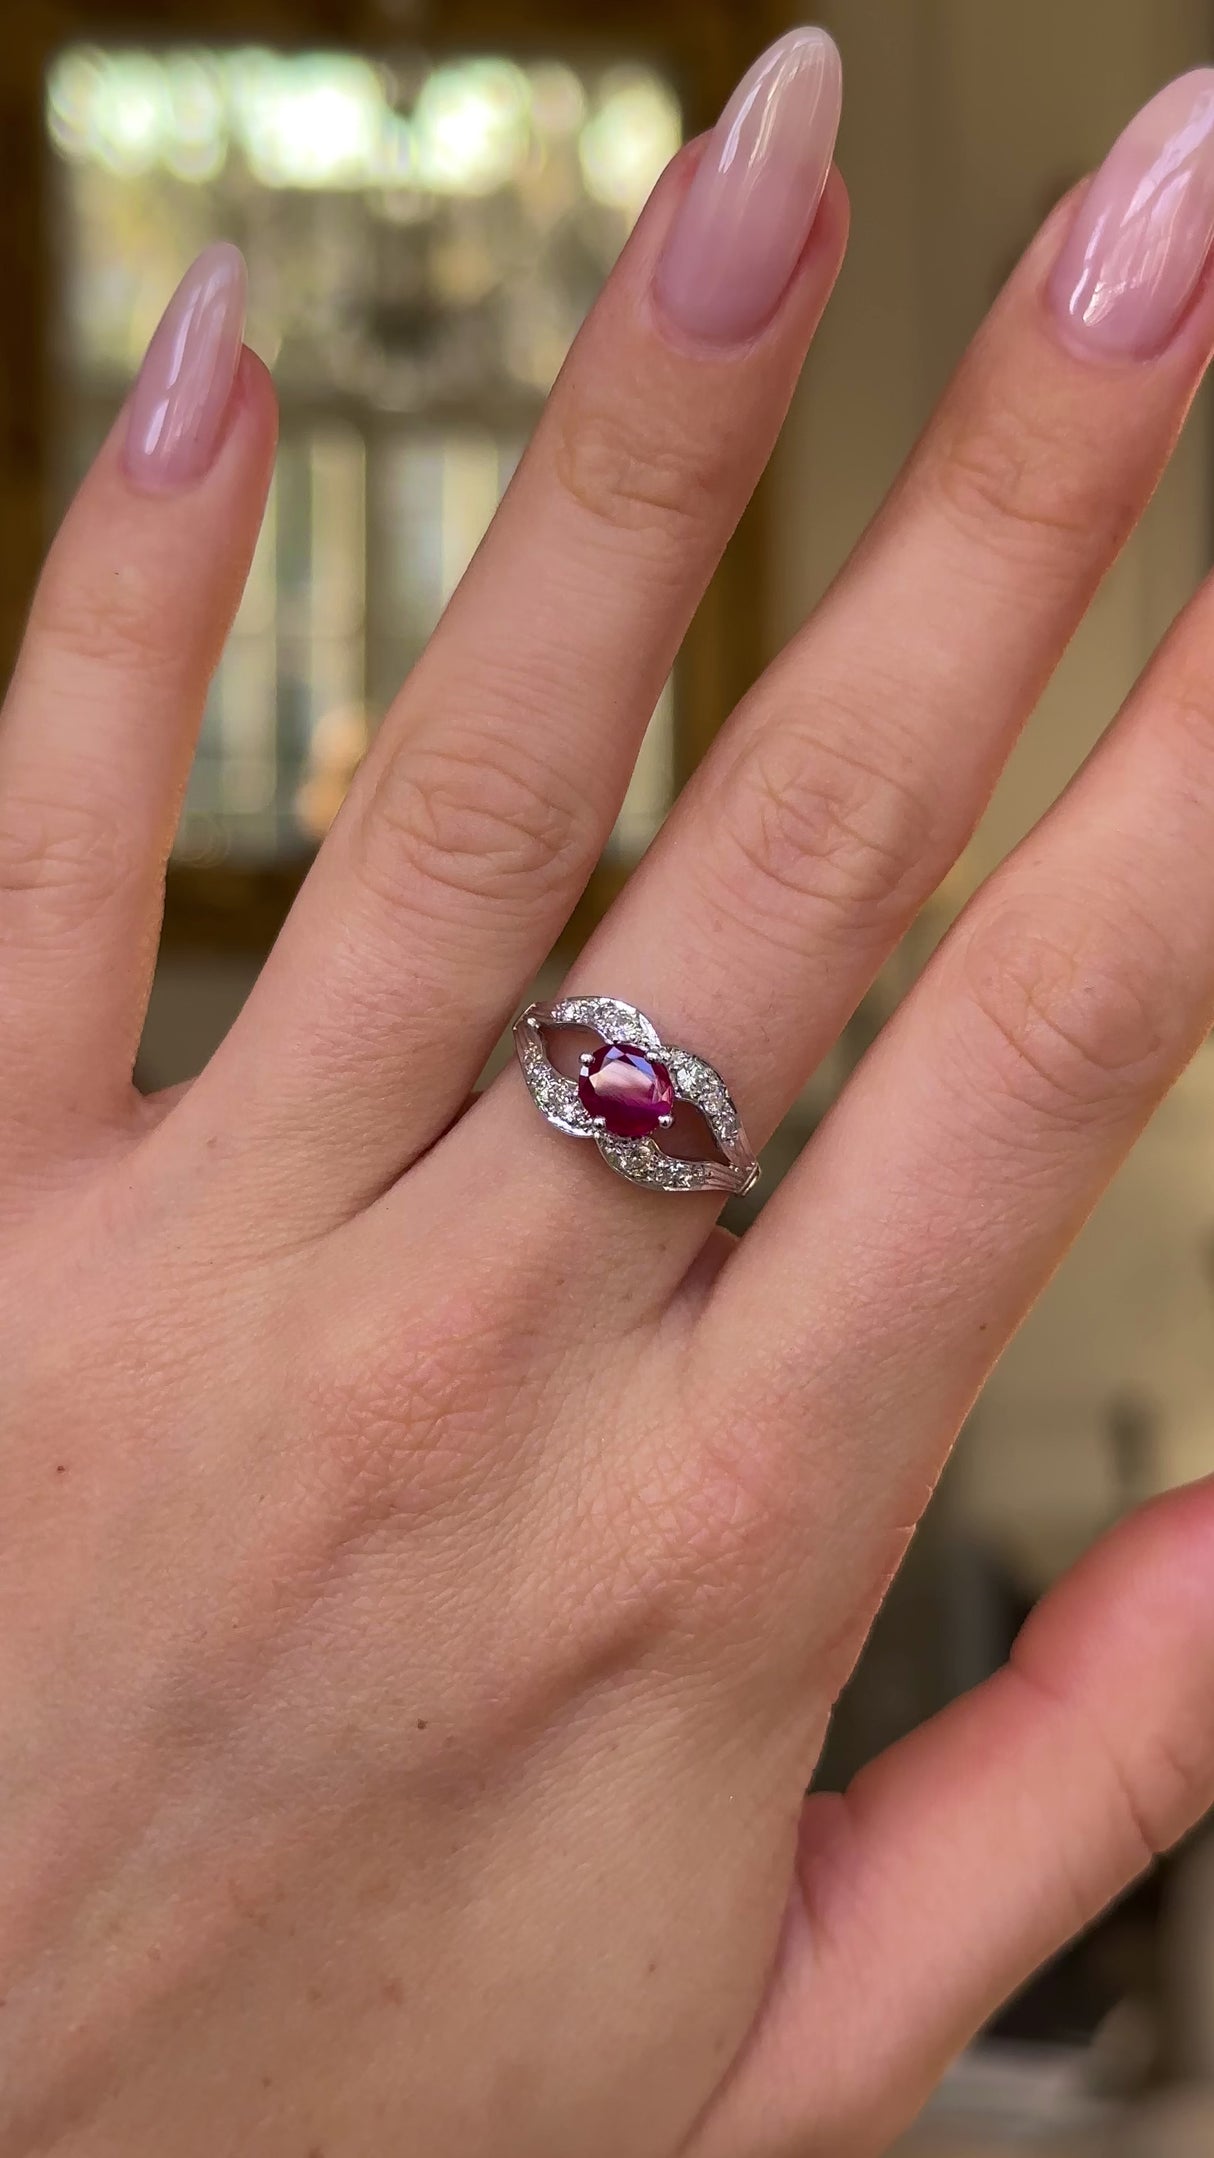 Vintage art deco ruby and diamond ring worn on hand and moved around to give perspective.